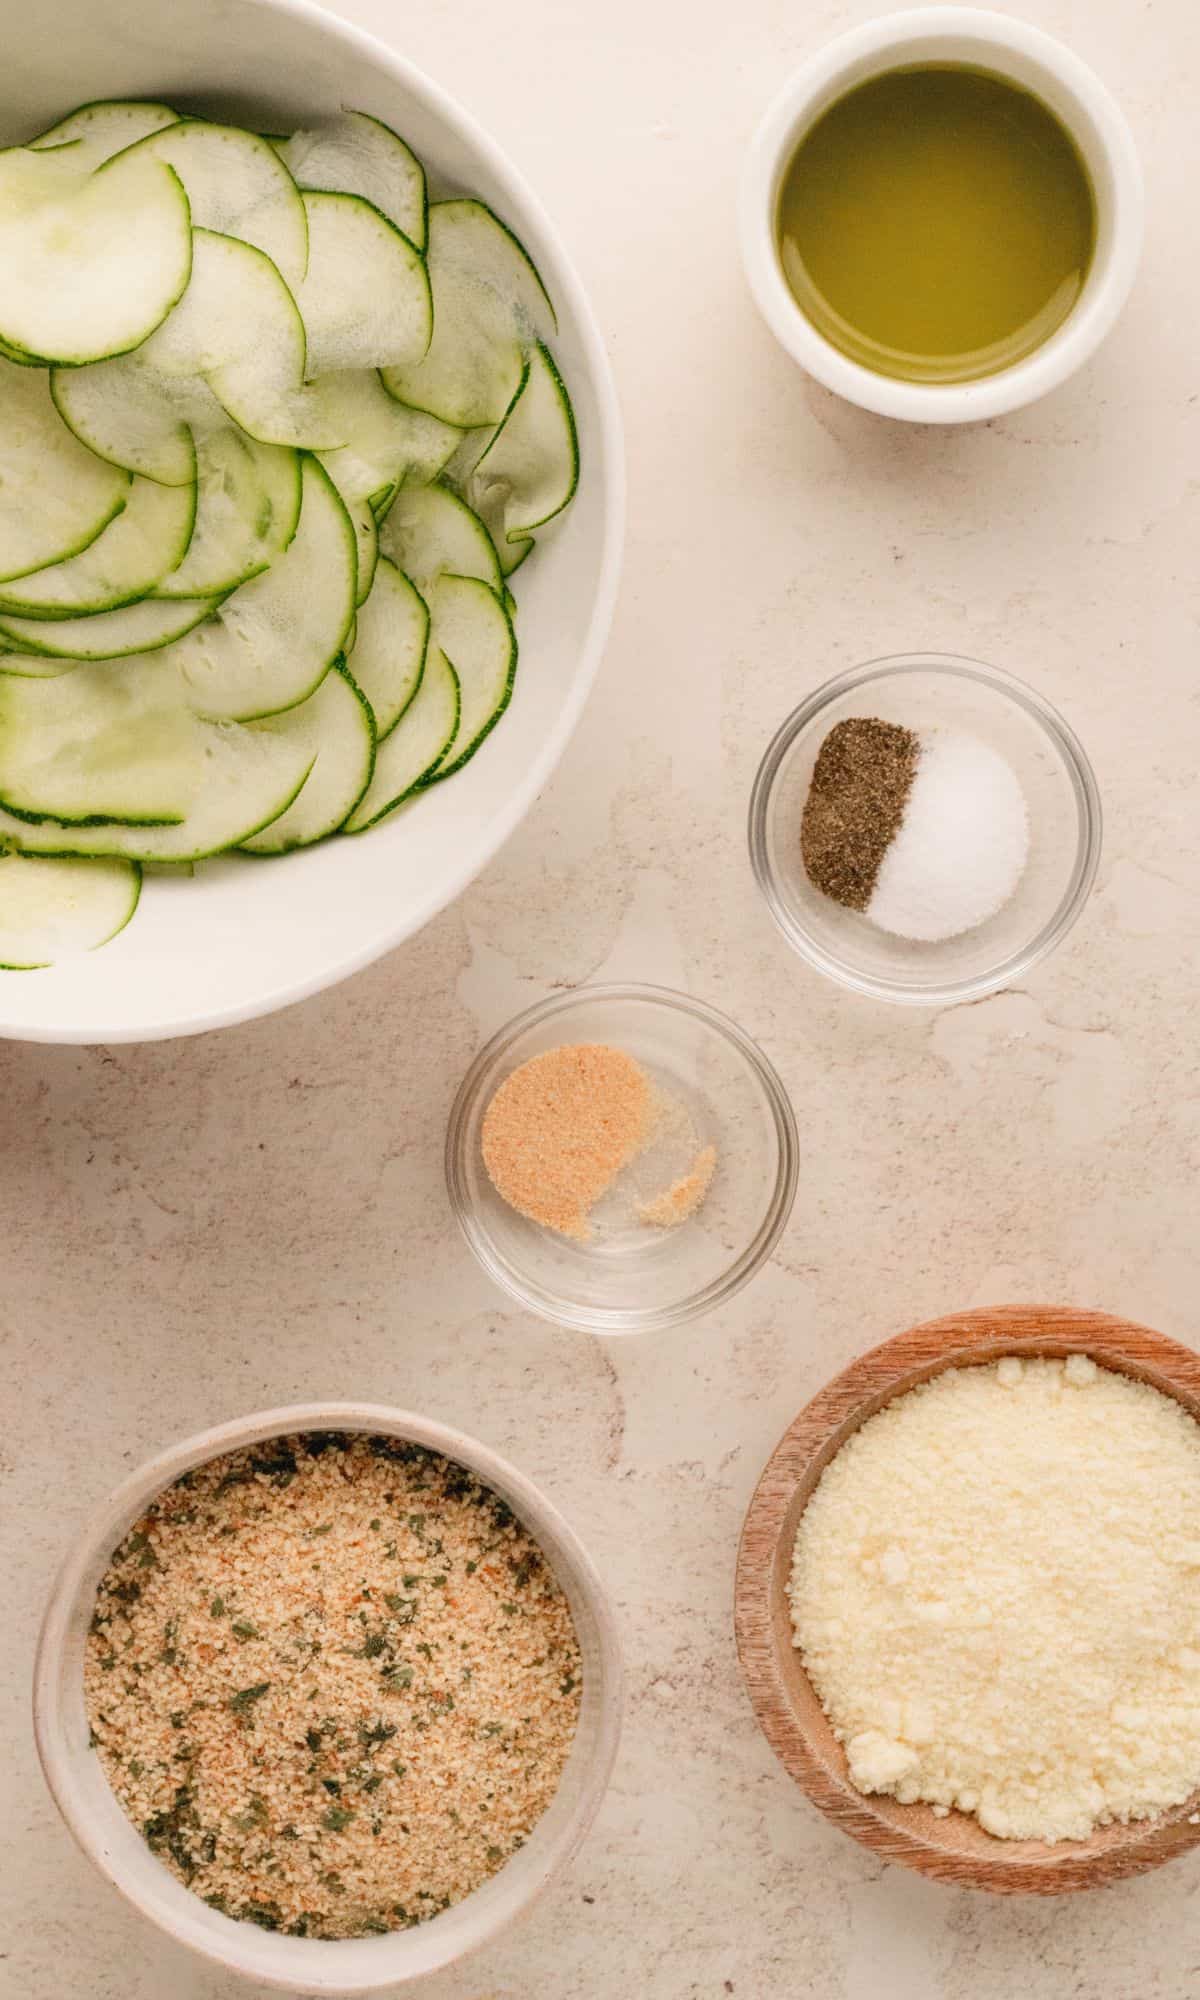 Zucchini chips ingredients in varying bowl shapes and sizes.